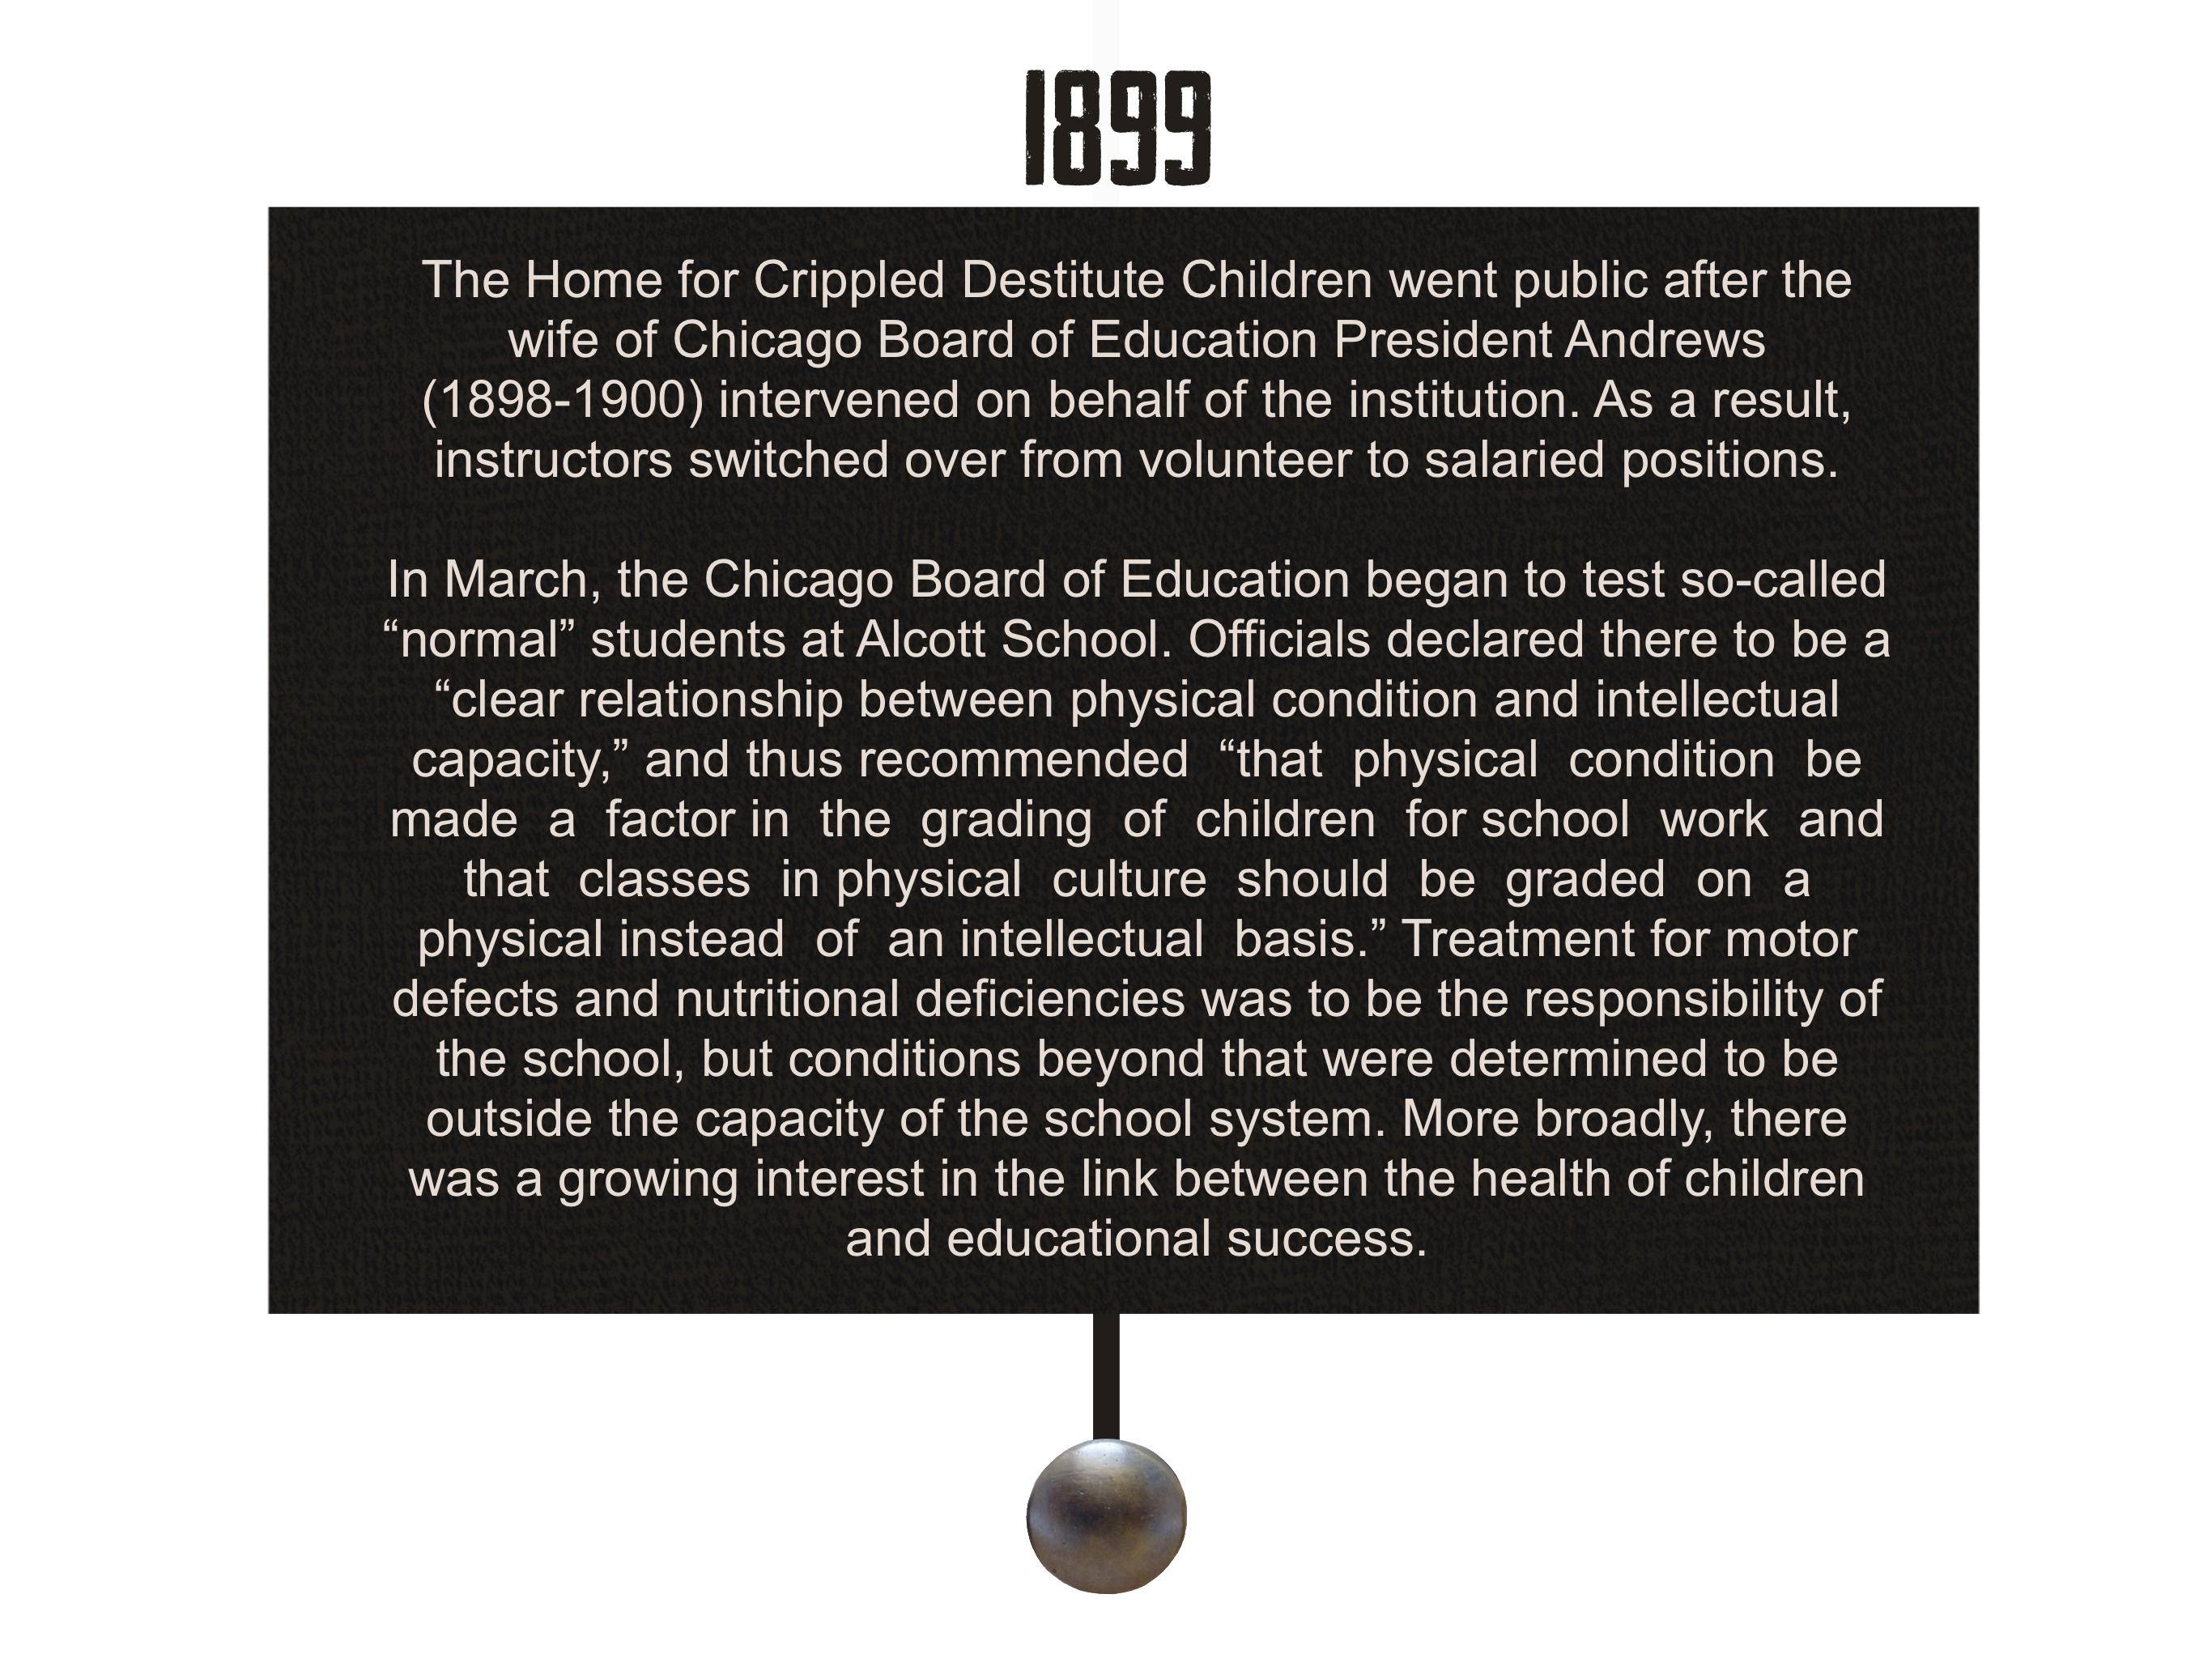 1899: The Home for Crippled Destitute Children went public after the wife of Chicago Board of Education President Andrews (1898-1900) intervened on behalf of the institution. As a result, instructors switched over from volunteer to salaried positions. 
        In March, the Chicago Board of Education began to test so-called “normal” students at Alcott School. Officials declared there to be a “clear relationship between physical condition and intellectual capacity,” and thus recommended  “that  physical  condition  be  made  a  factor in  the  grading  of  children  for school  work  and  that  classes  in physical  culture  should  be  graded  on  a  physical instead  of  an intellectual  basis.” Treatment for motor defects and nutritional deficiencies was to be the responsibility of the school, but conditions beyond that are determined to be outside the capacity of the school system. More broadly, there was a growing interest in the link between the health of children and educational success.
        